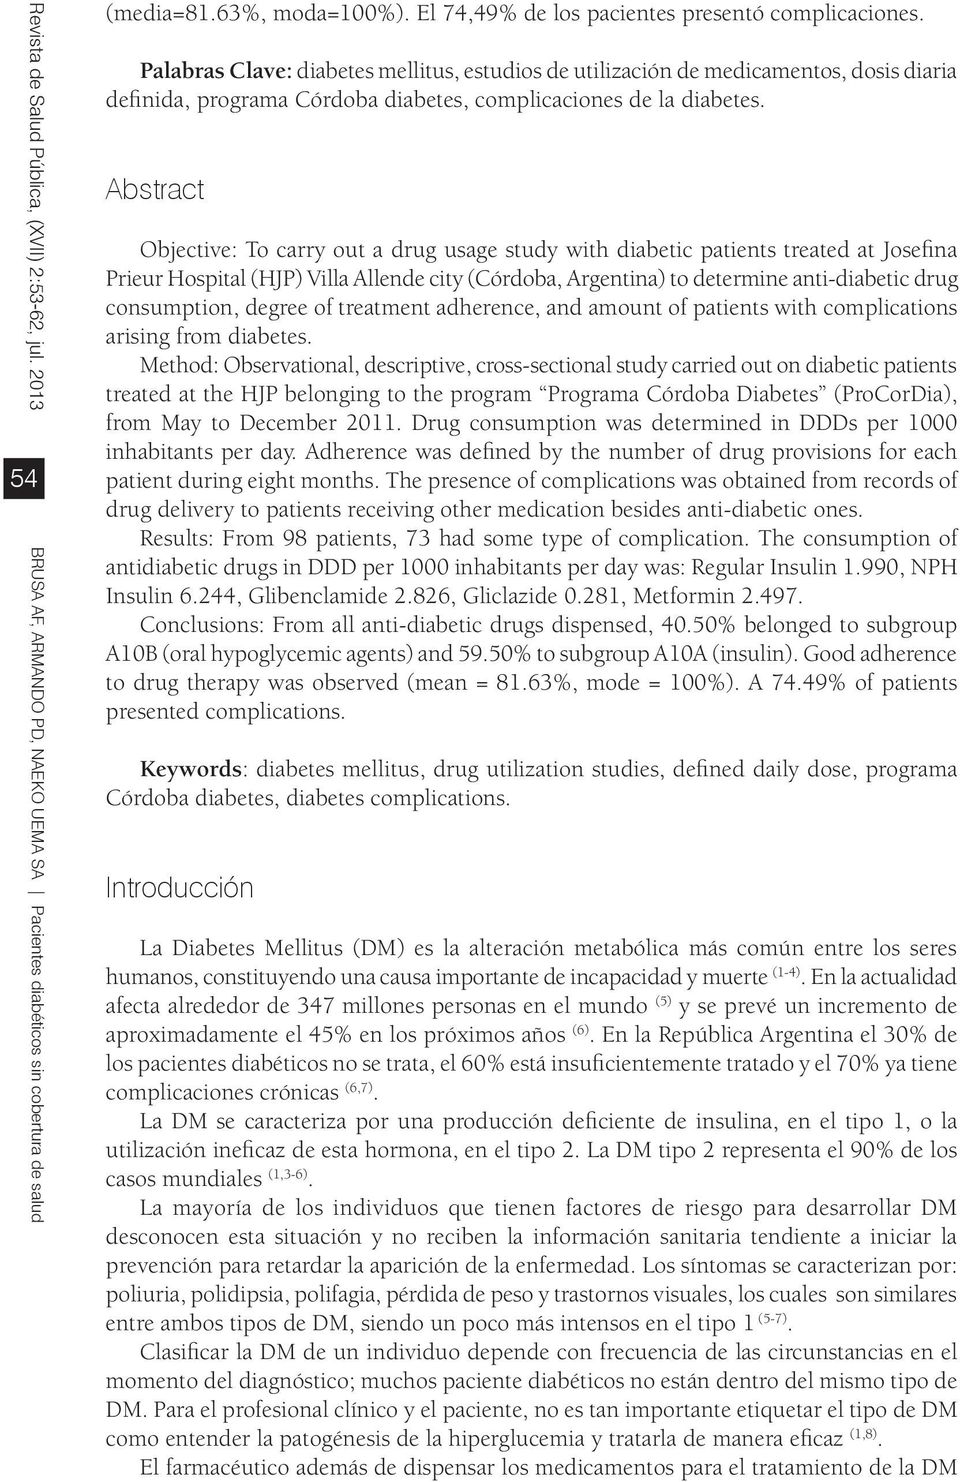 Abstract Objective: To carry out a drug usage study with diabetic patients treated at Josefina Prieur Hospital (HJP) Villa Allende city (Córdoba, Argentina) to determine anti-diabetic drug